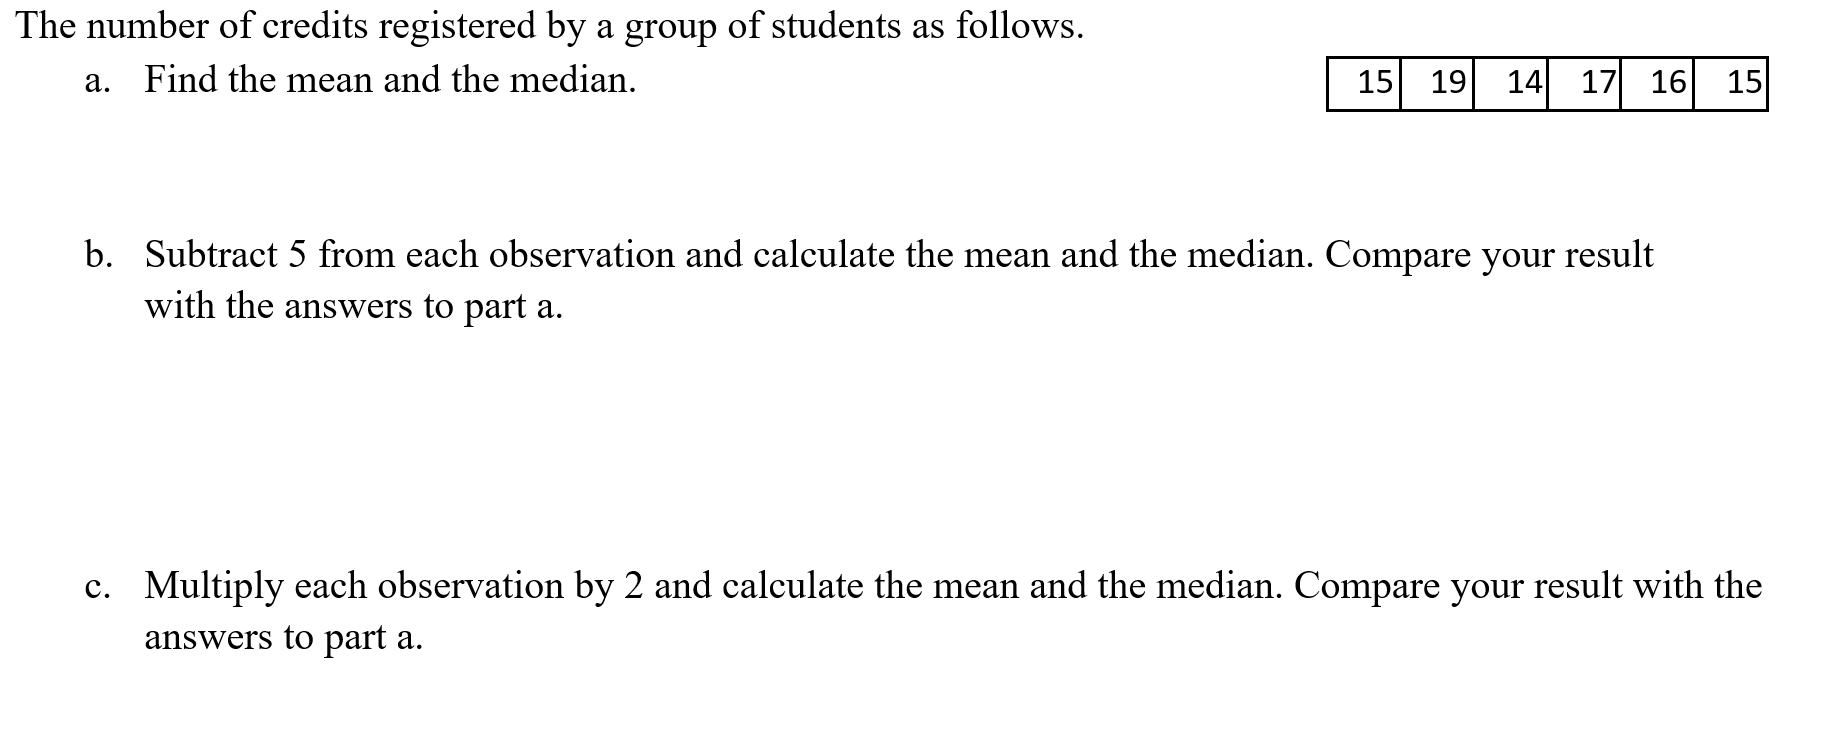 The number of credits registered by a group of students as follows.
a. Find the mean and the median.
15
19
14
17 16 15
b. Subtract 5 from each observation and calculate the mean and the median. Compare your result
with the answers to part a.
c. Multiply each observation by 2 and calculate the mean and the median. Compare your result with the
answers to part a.
